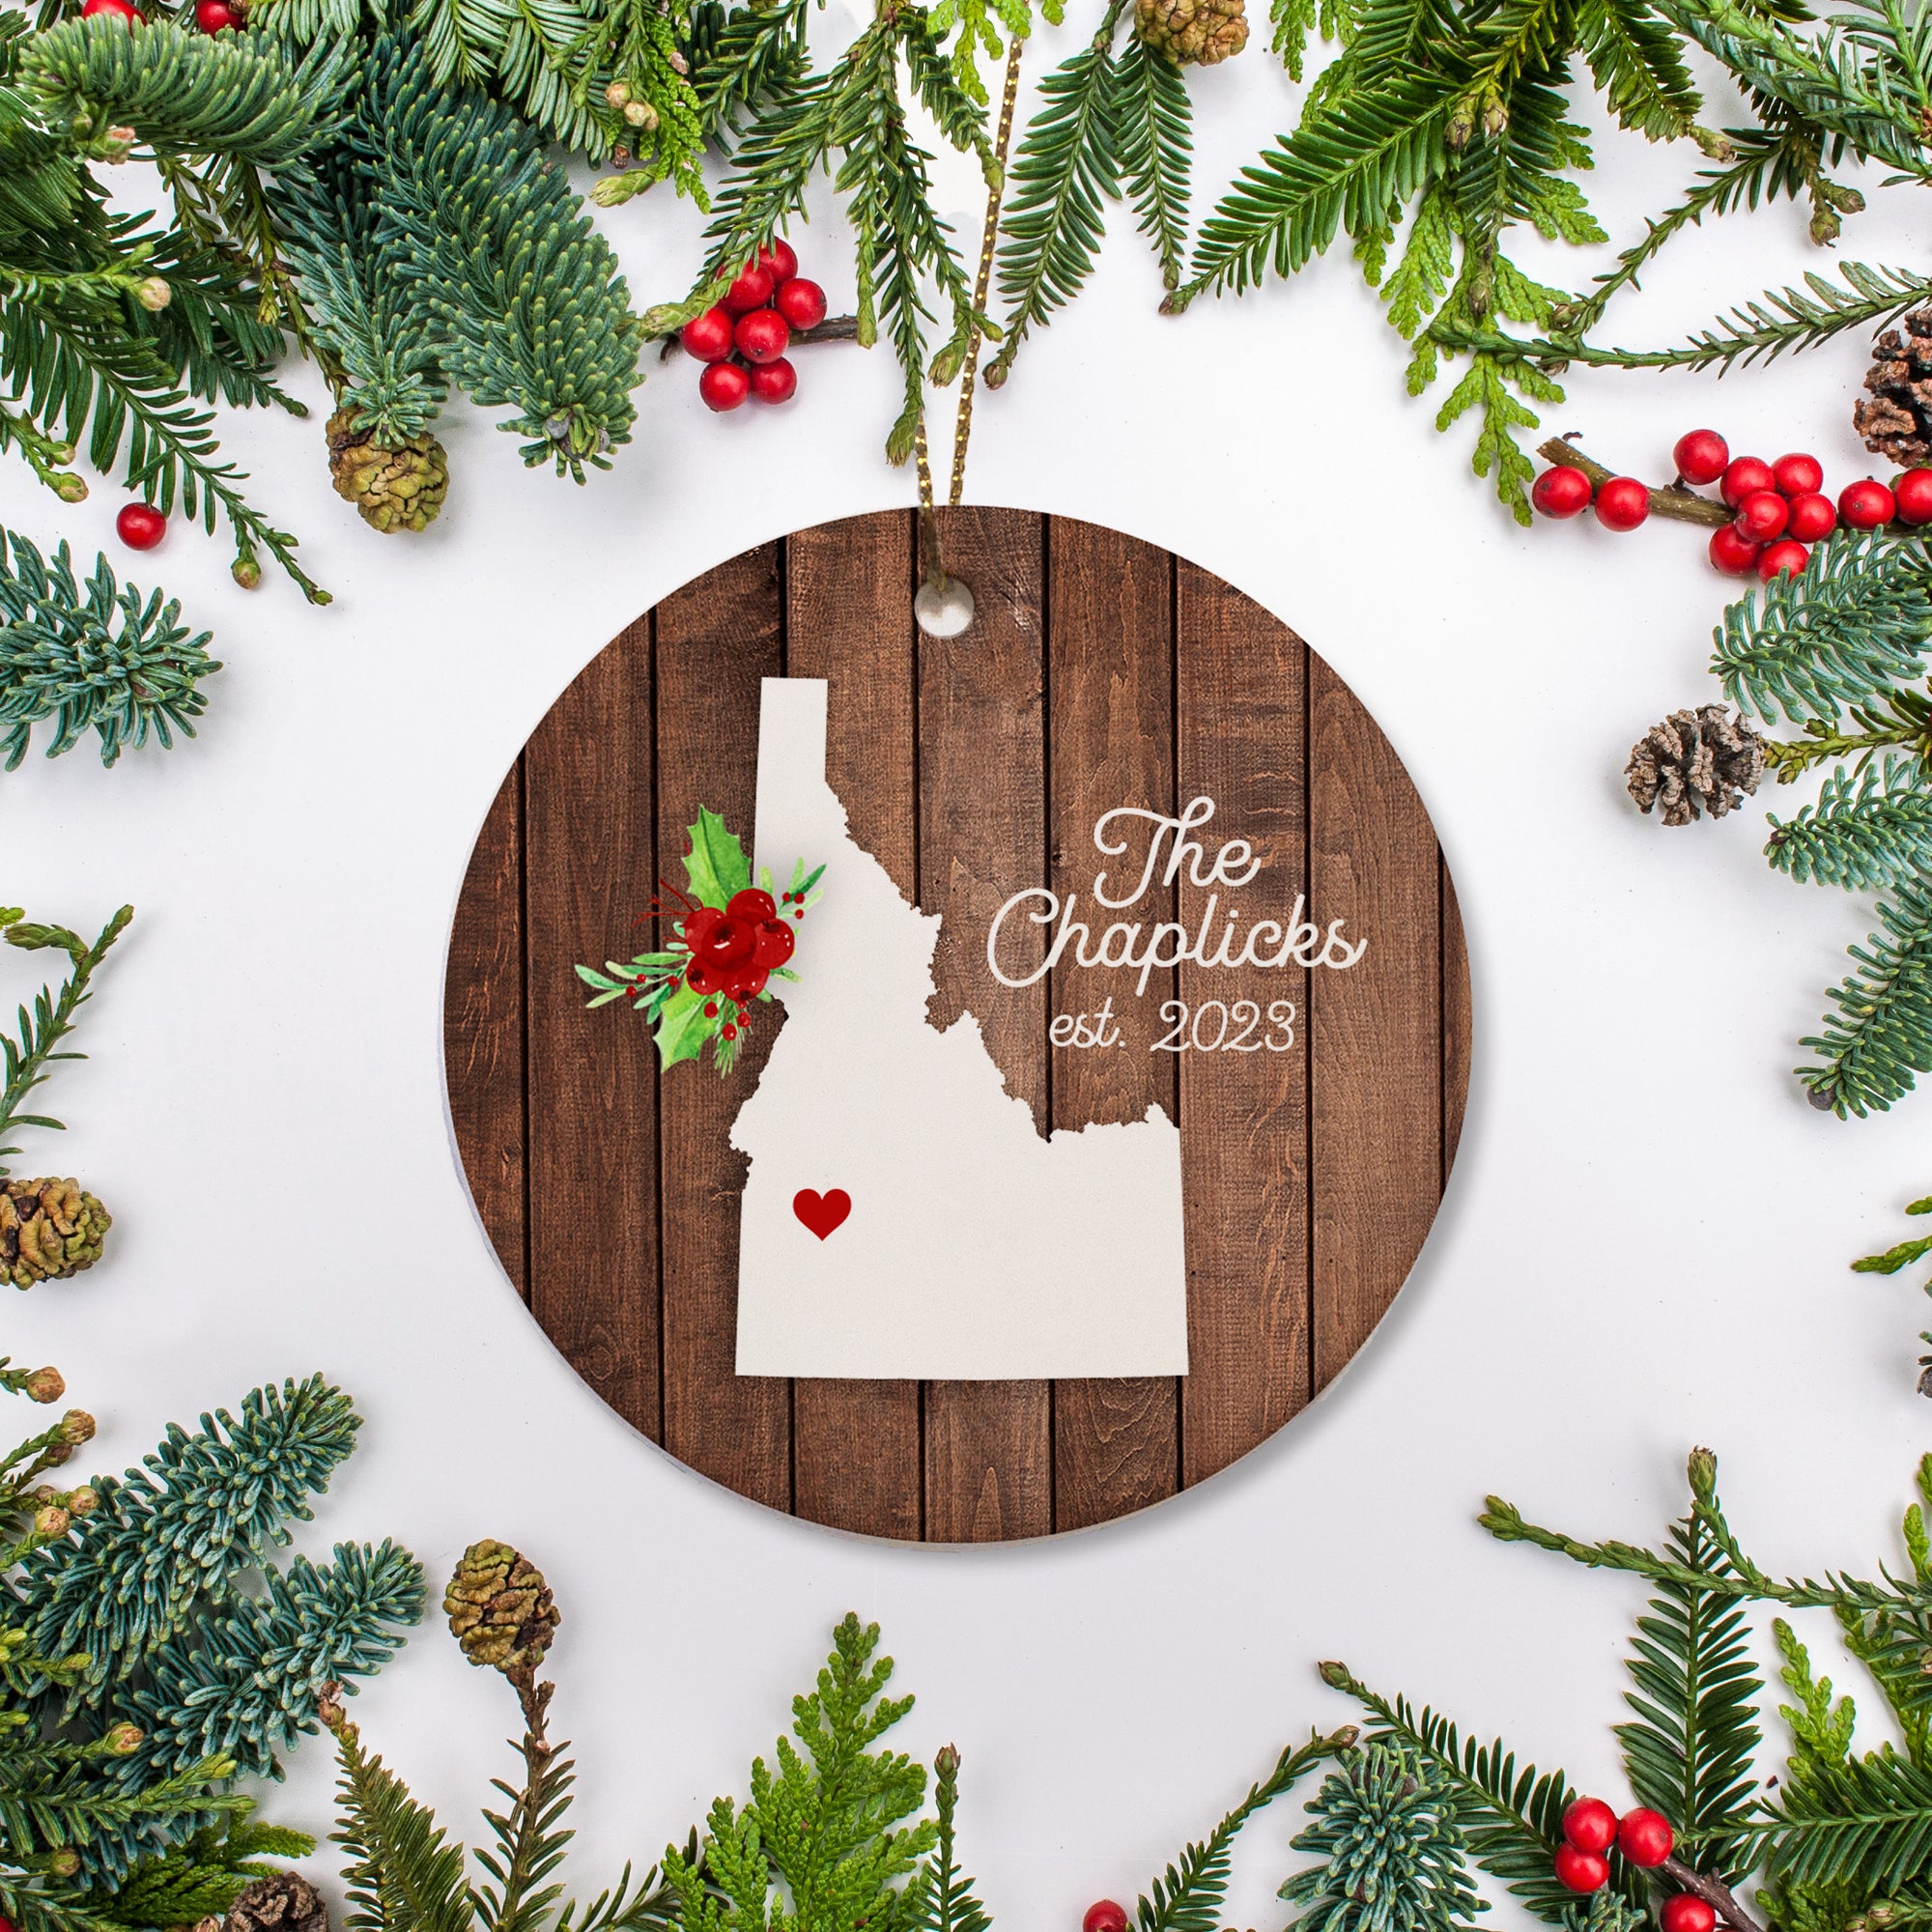 Idaho state christmas ornament. Personalized with your name, city, and year. Ceramic keepsake ornament with a gold hanging string. Great for a college student, new home owners, just moved, or vacation memory